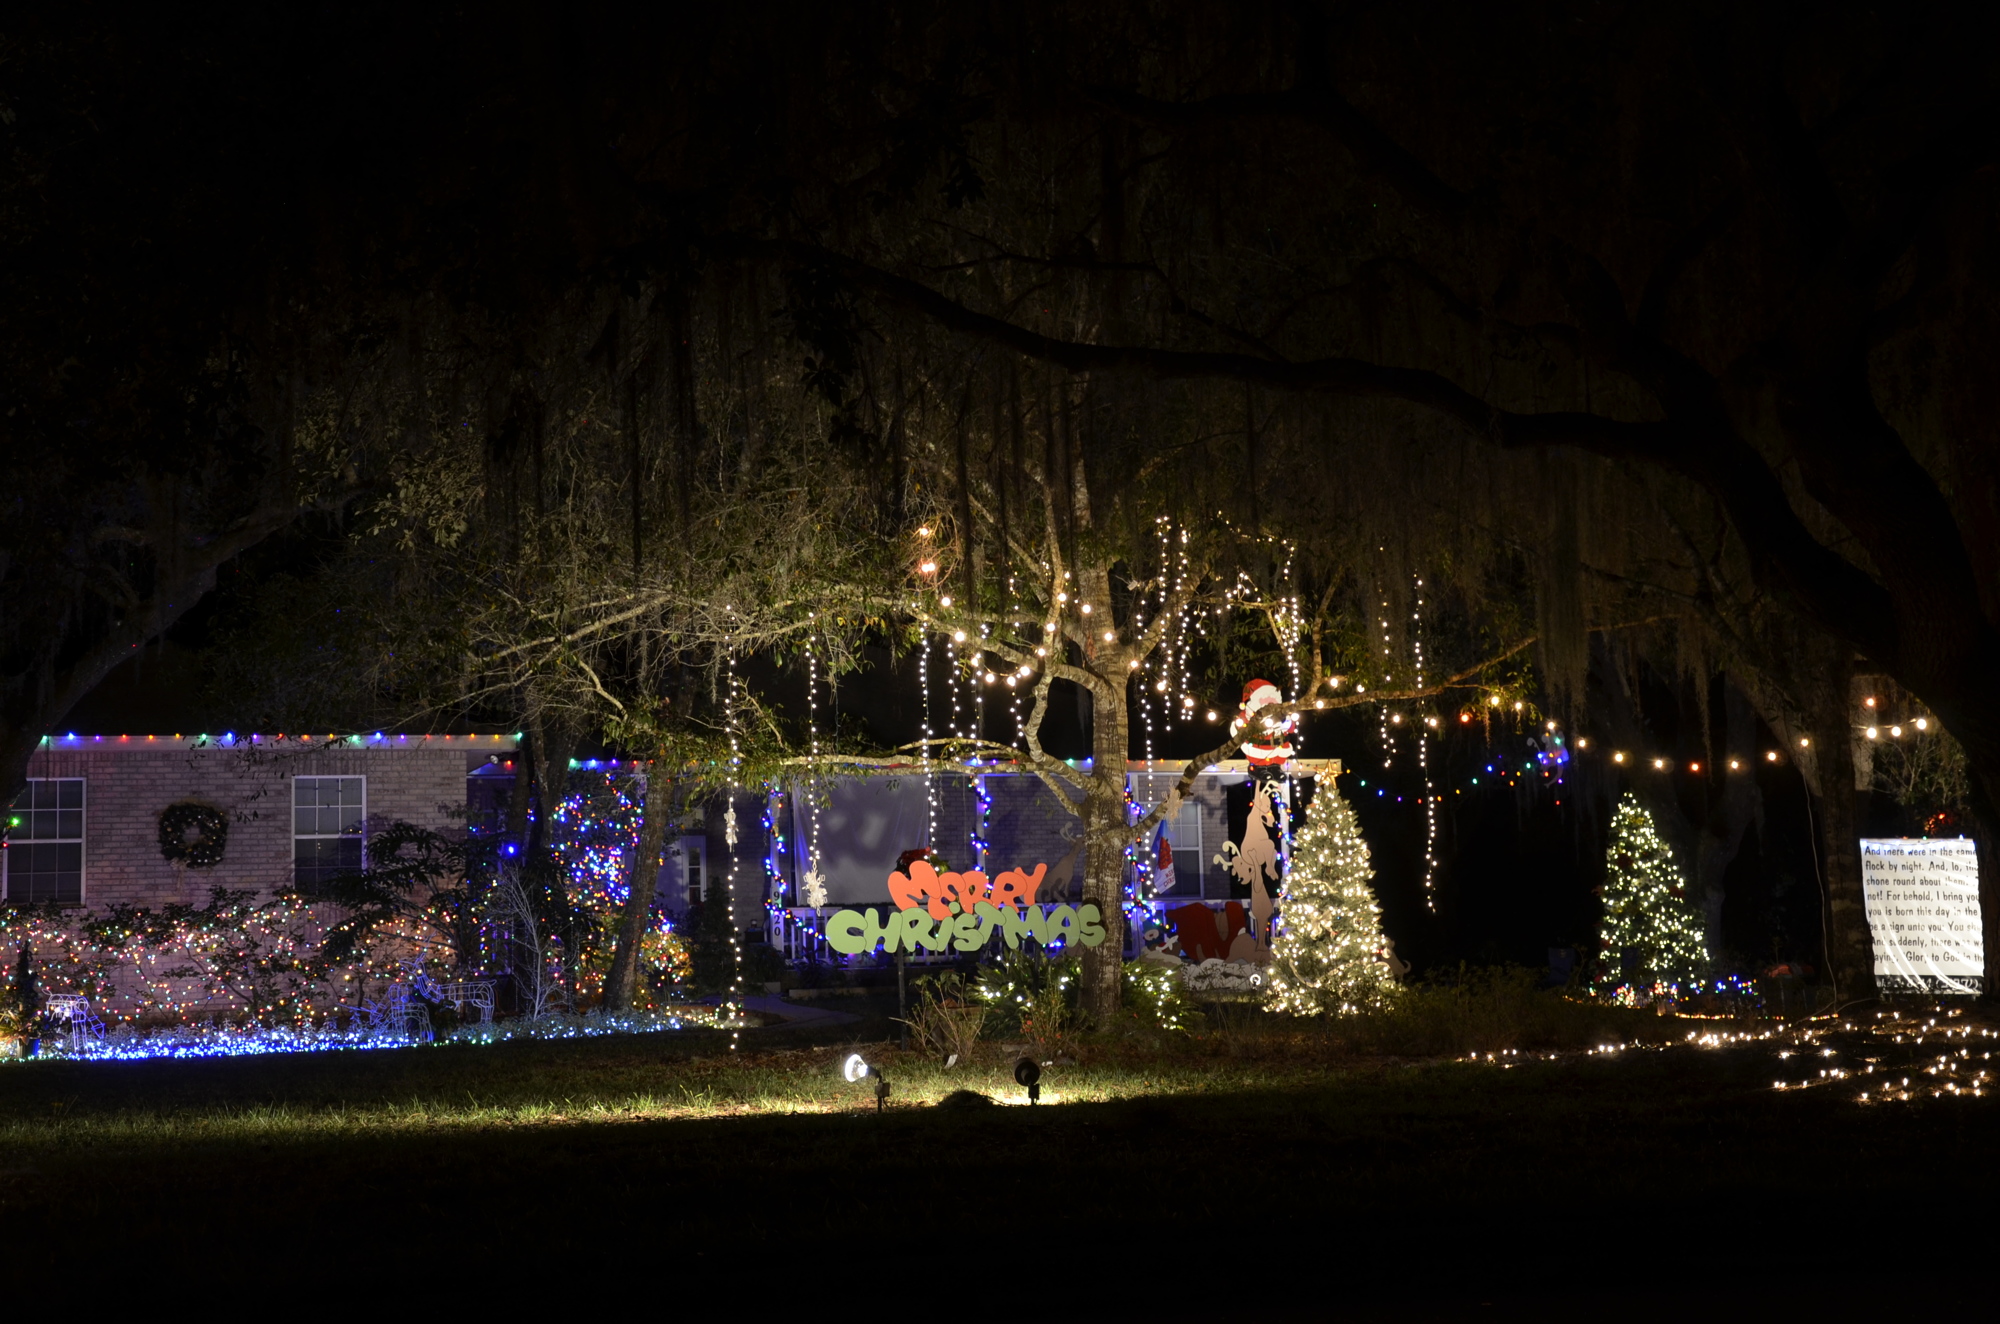 Make sure to check out the Peanuts Christmas scene in Braden Woods, 9200 block of 65th Avenue East.